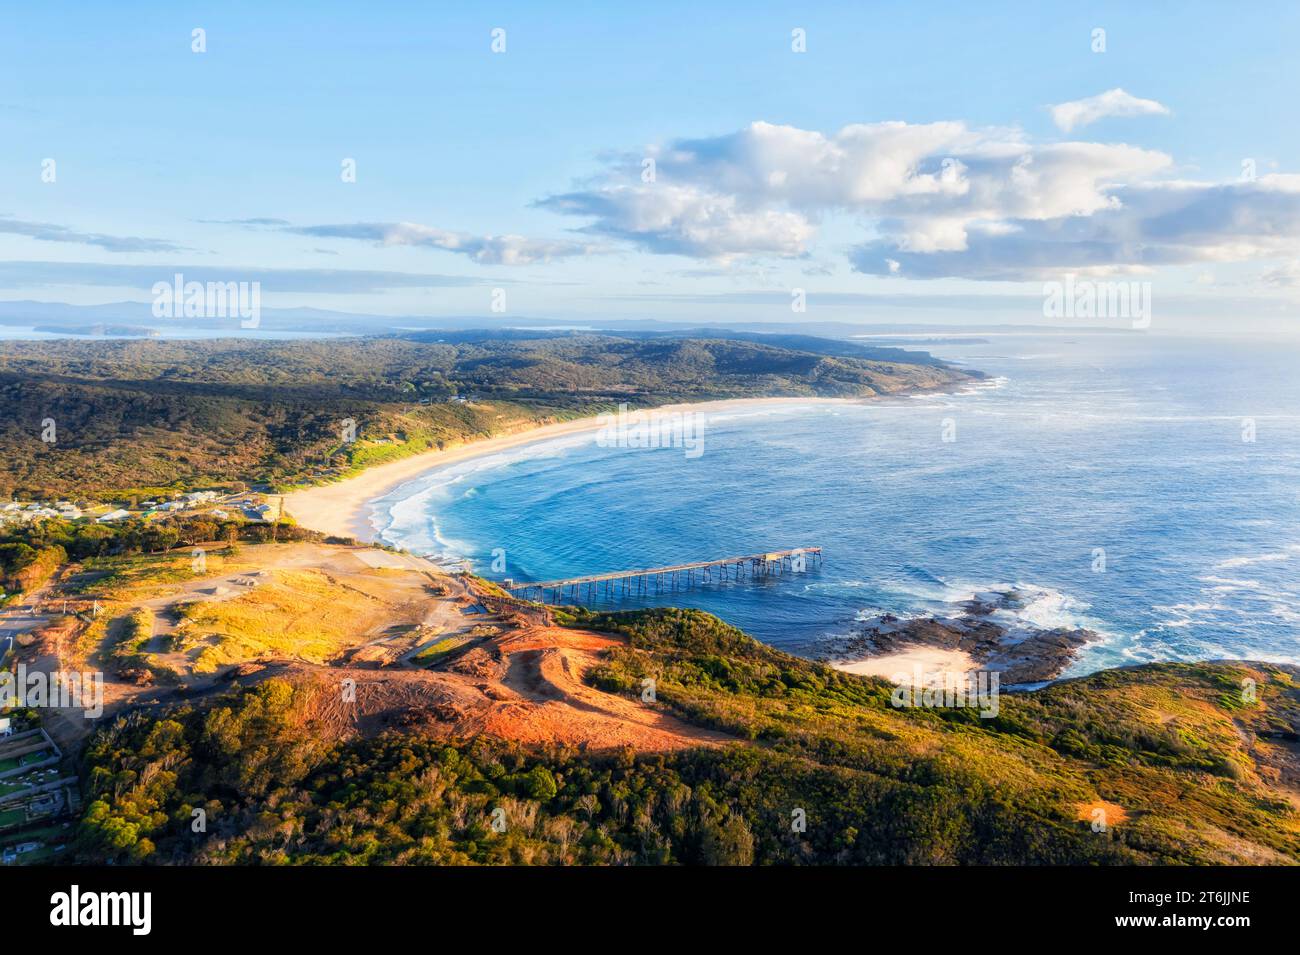 Scenic aerial landscape of Catherine hill bay coastal town in Australia on Pacific ocean. Stock Photo